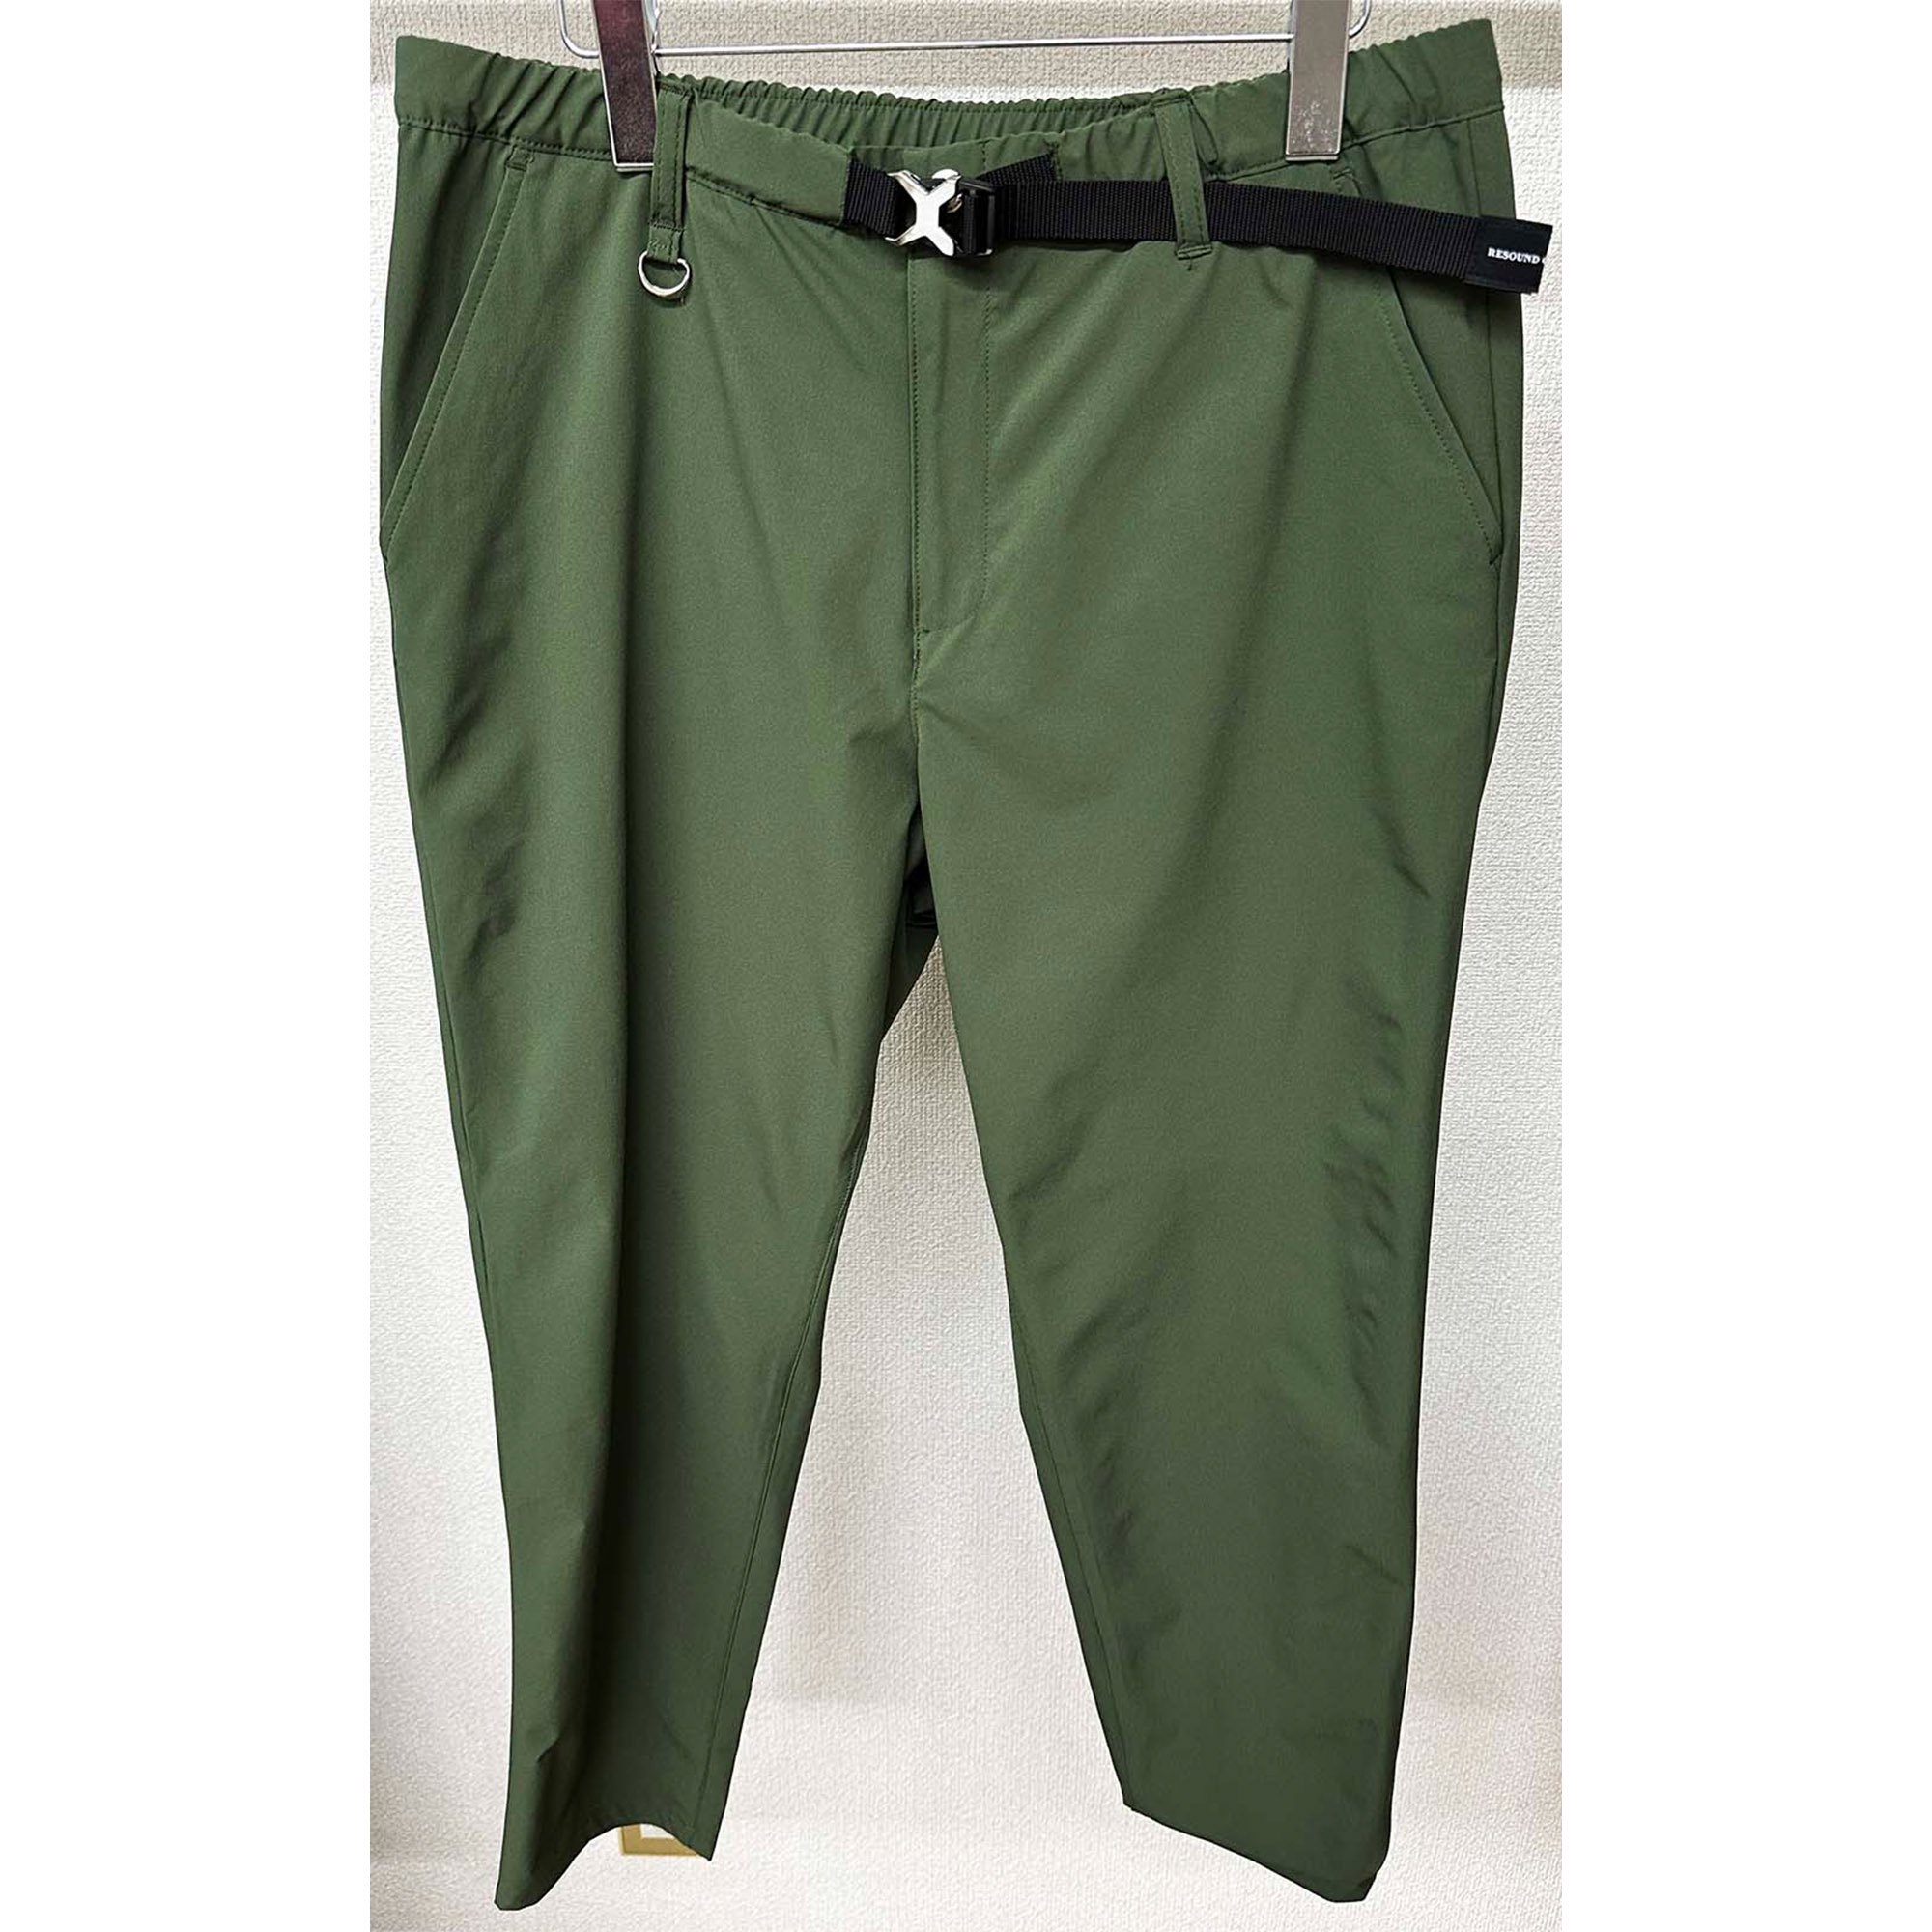 <img class='new_mark_img1' src='https://img.shop-pro.jp/img/new/icons1.gif' style='border:none;display:inline;margin:0px;padding:0px;width:auto;' />PAT WIDE EASY PANTS NYLONKHAKI